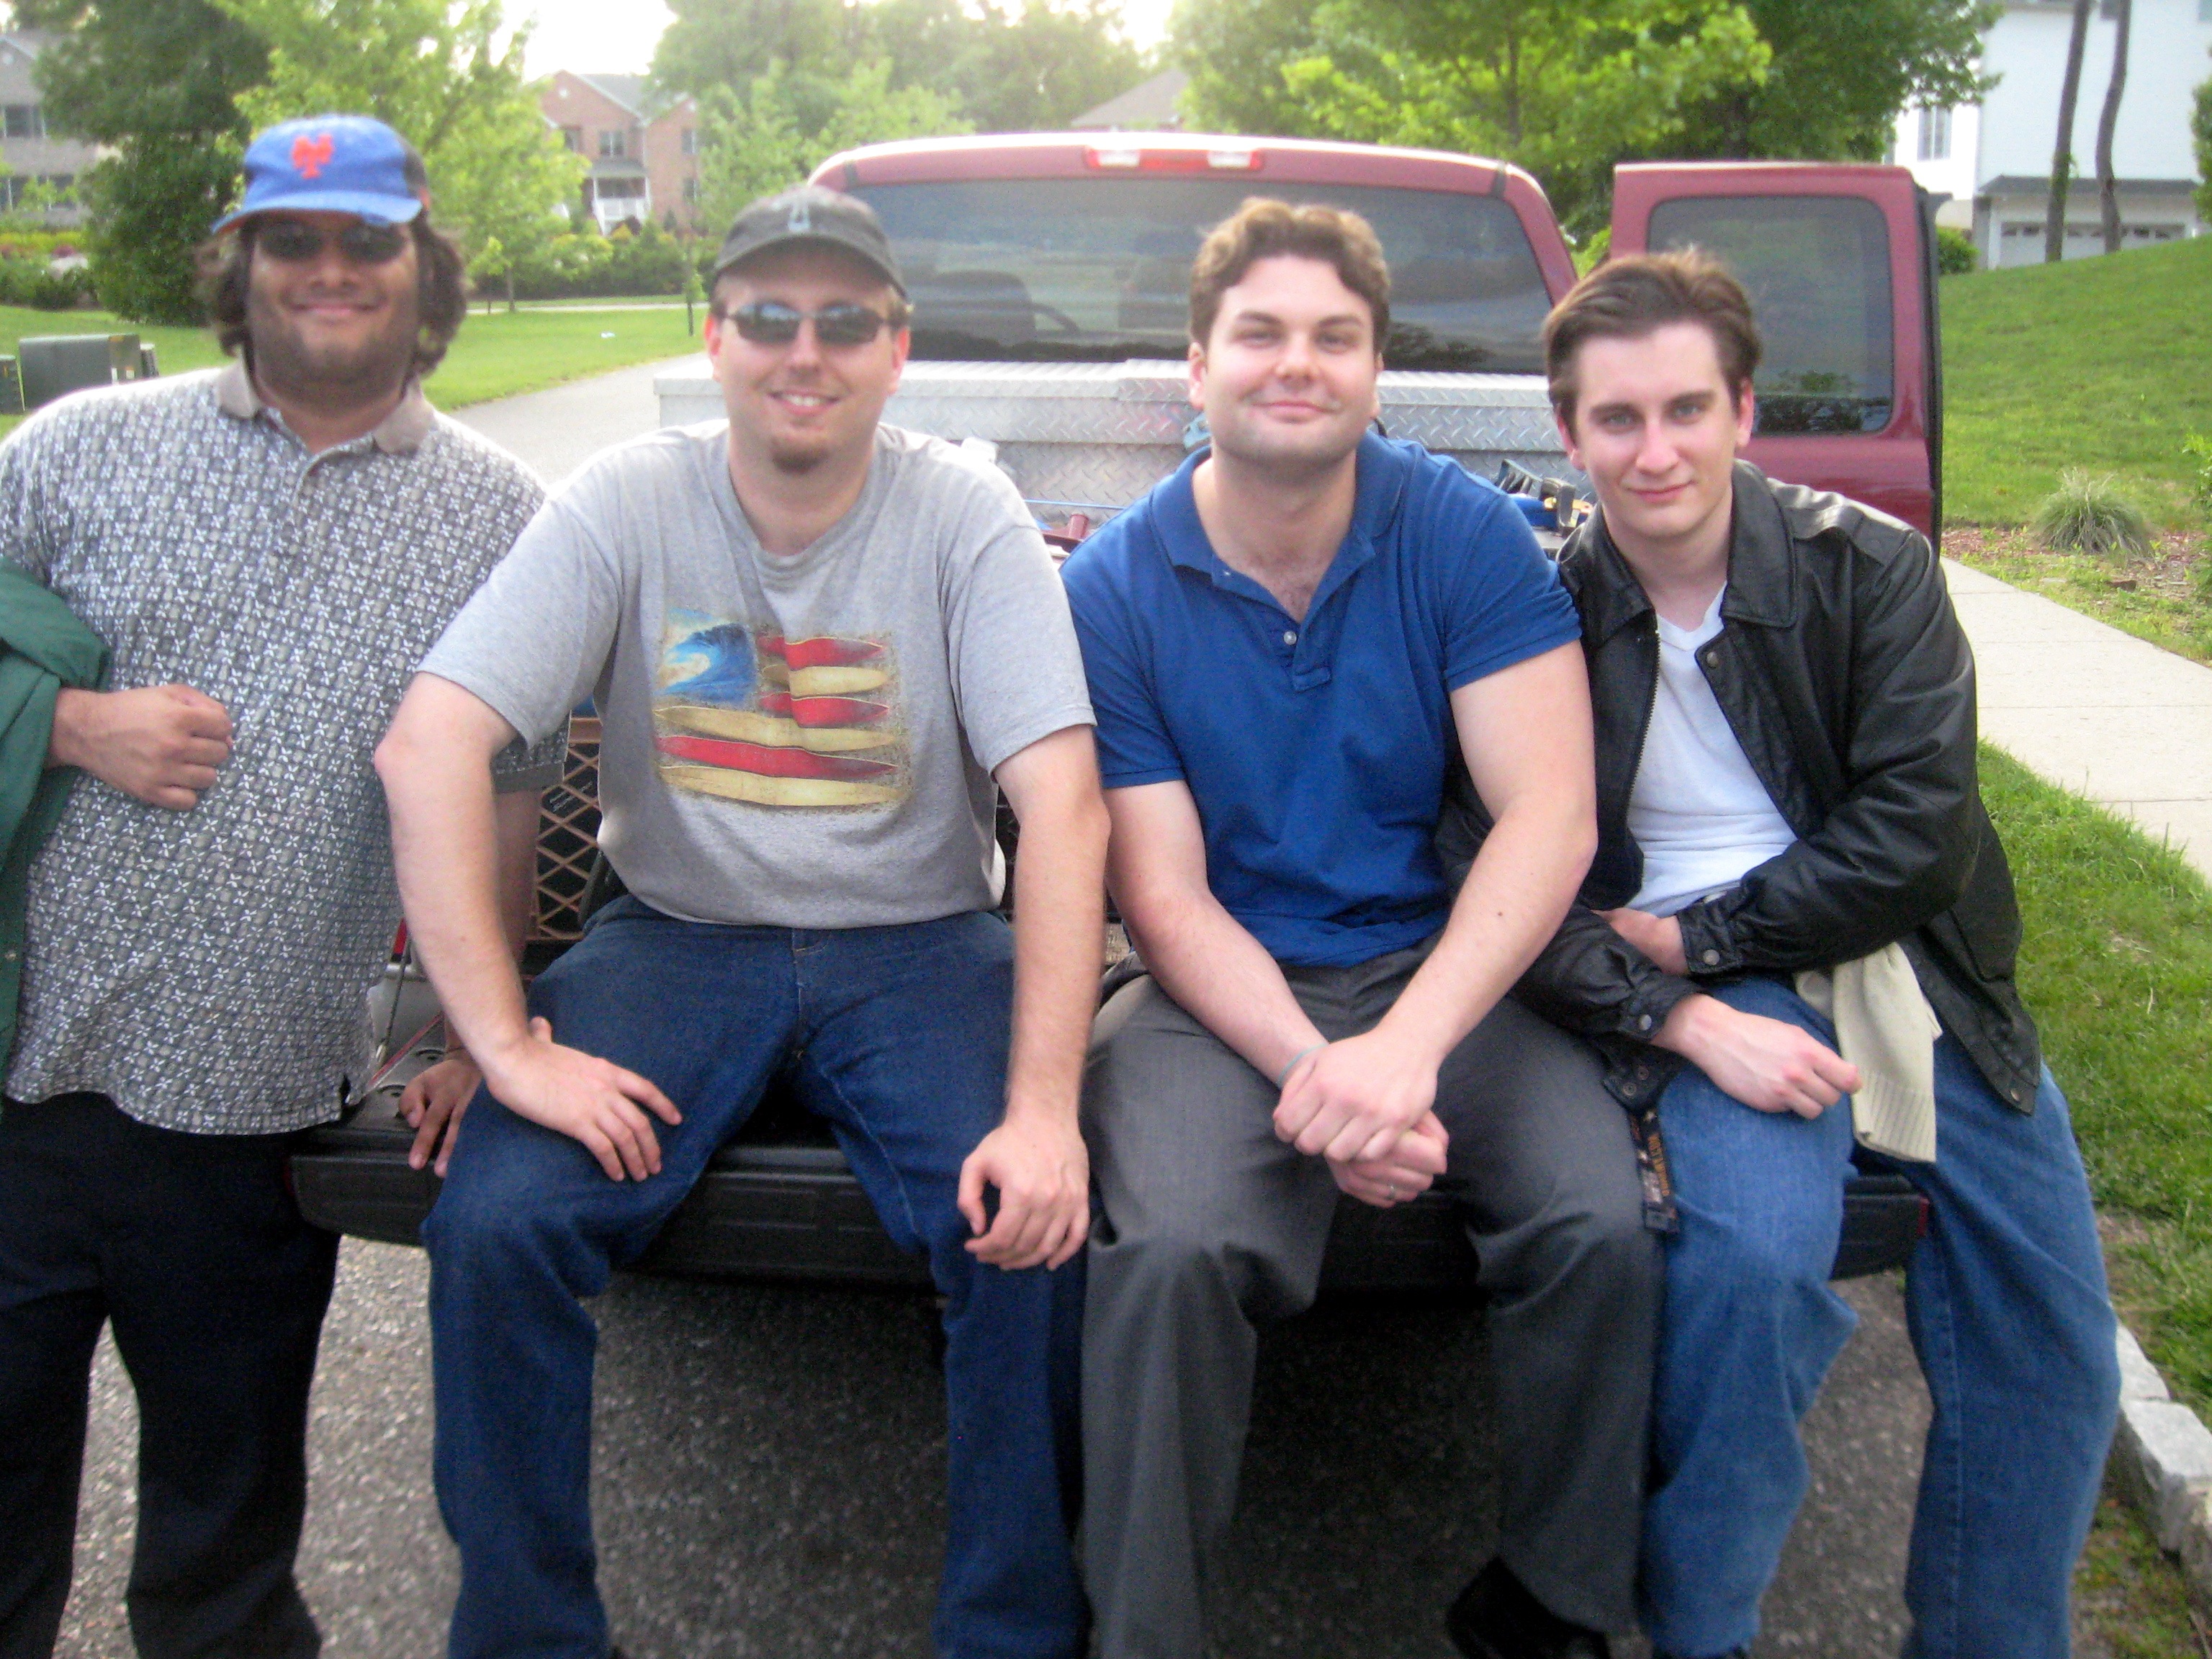 On set of The Definitive Point, production date: Summer 2010. In photo: (From Left to Right) Amay Sashital, Blake Zawadzki, Dan Gregory, and Alan Kendall.